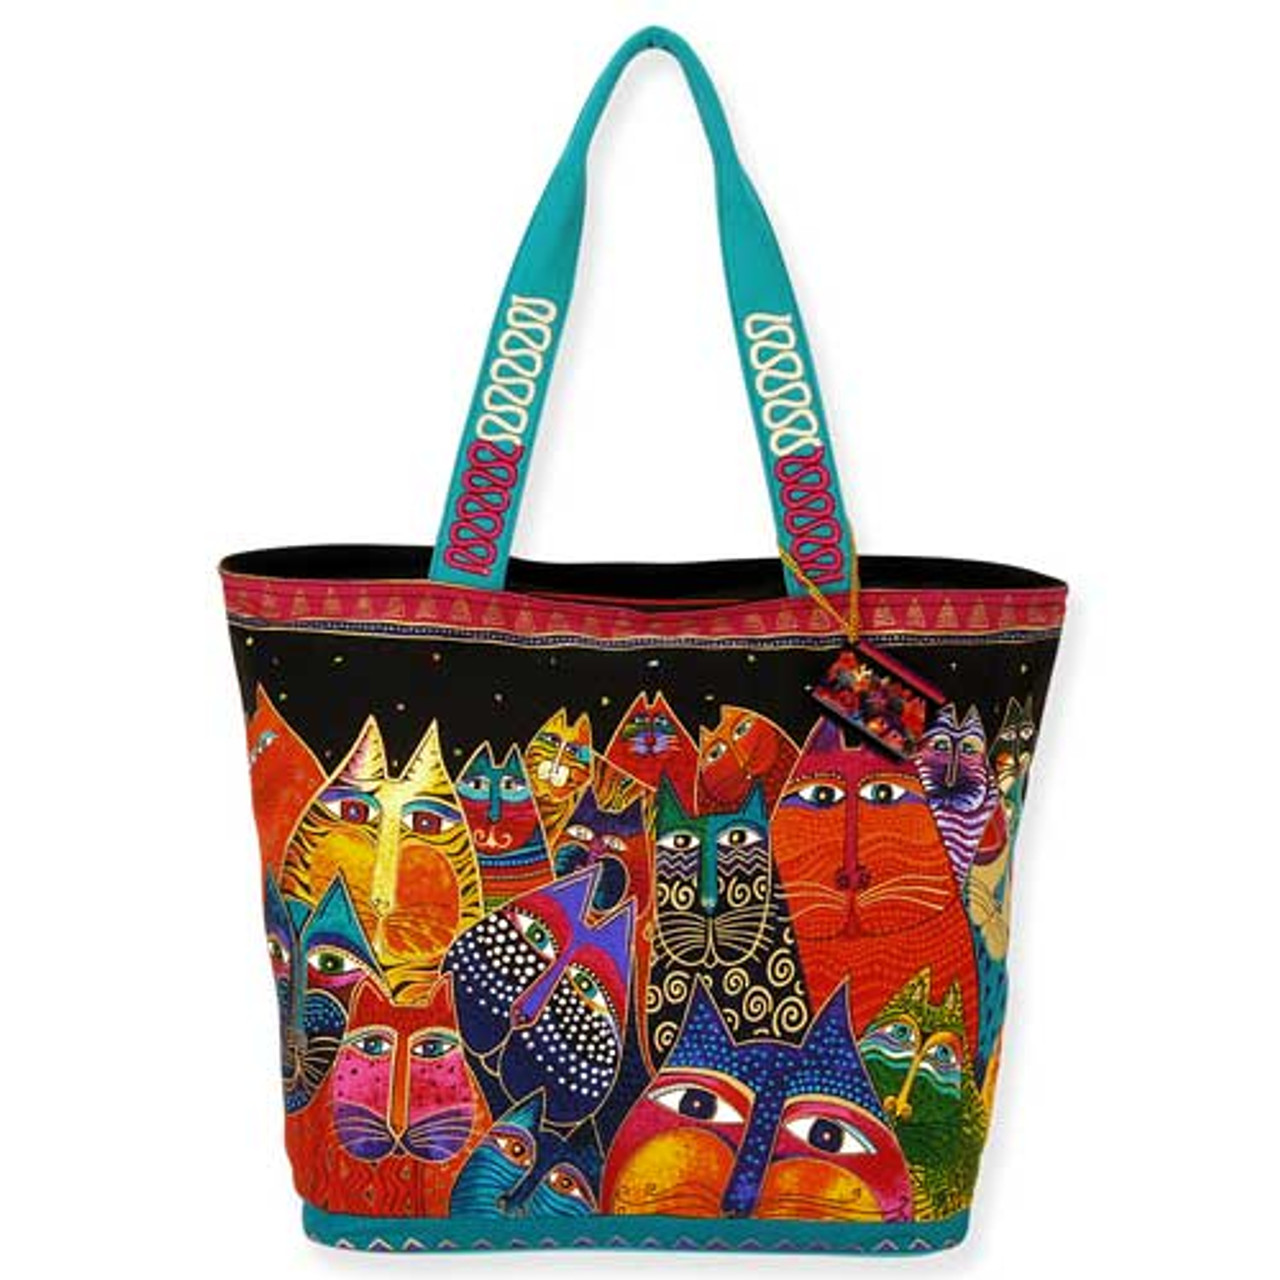 Laurel Burch Coin Purses, with Dogs, Cats & Mystical Horses